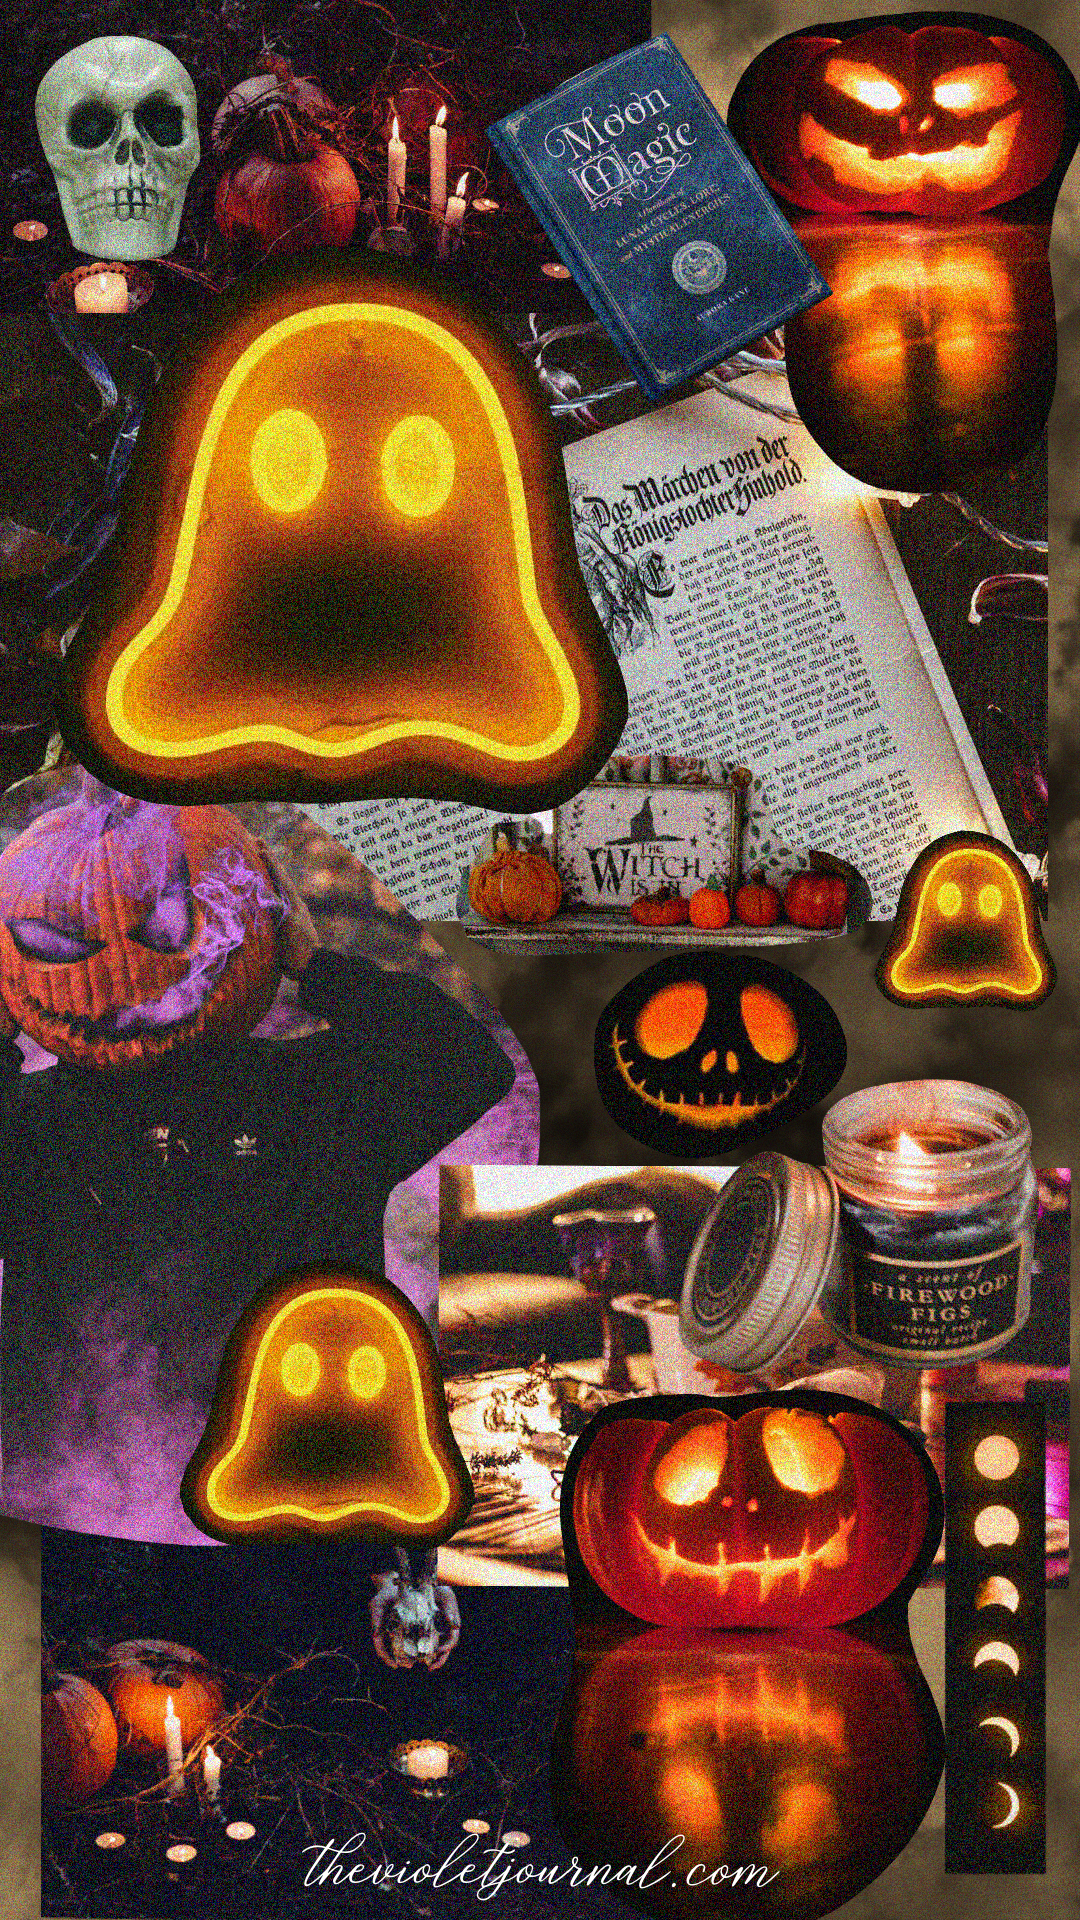 Aesthetic Wallpaper for Fall and Halloween. Halloween wallpaper iphone, Halloween wallpaper iphone background, Cute fall wallpaper